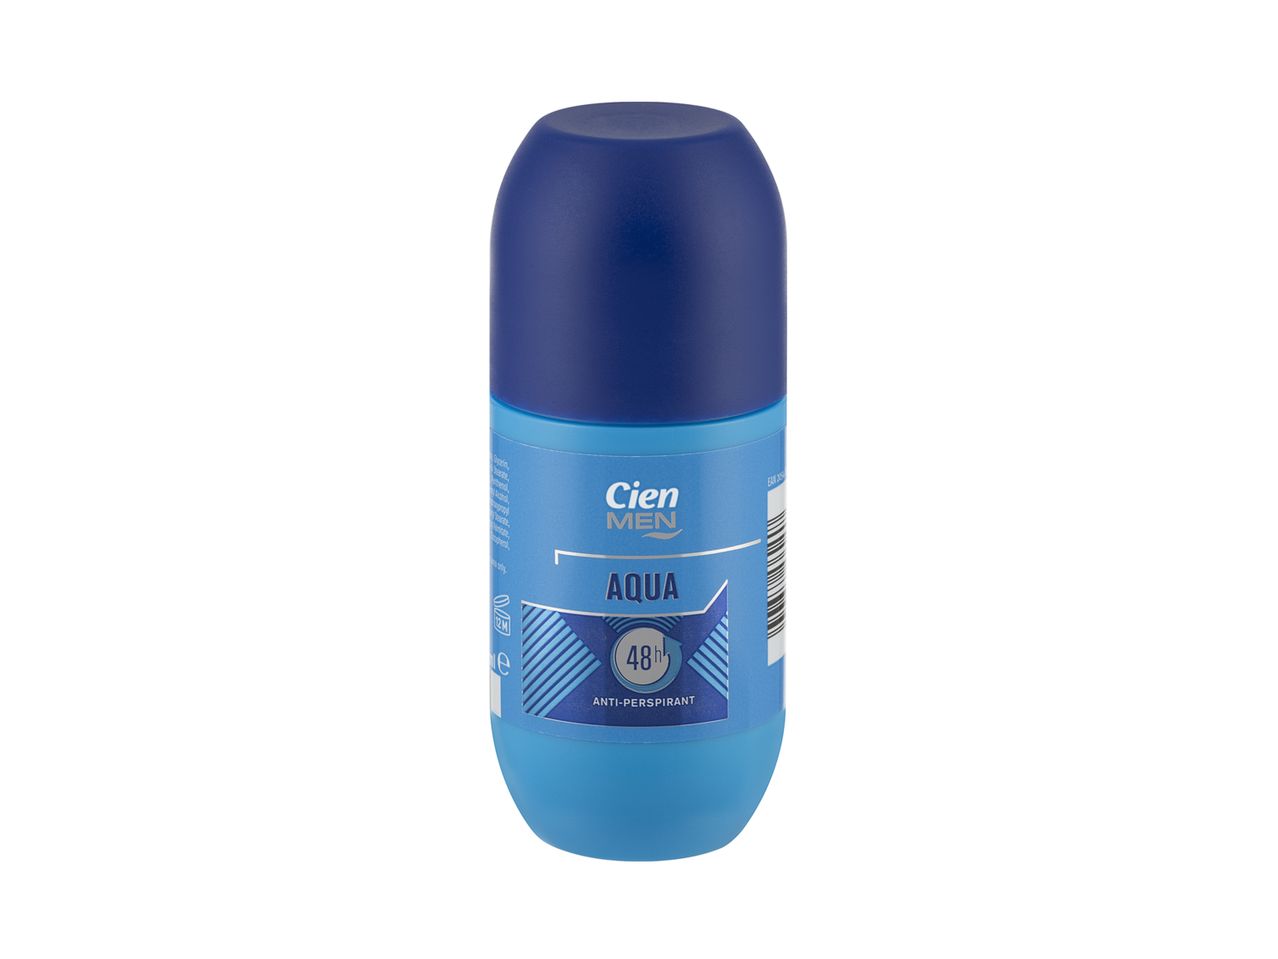 Go to full screen view: Cien Roll On Deodorant for Men - Image 1